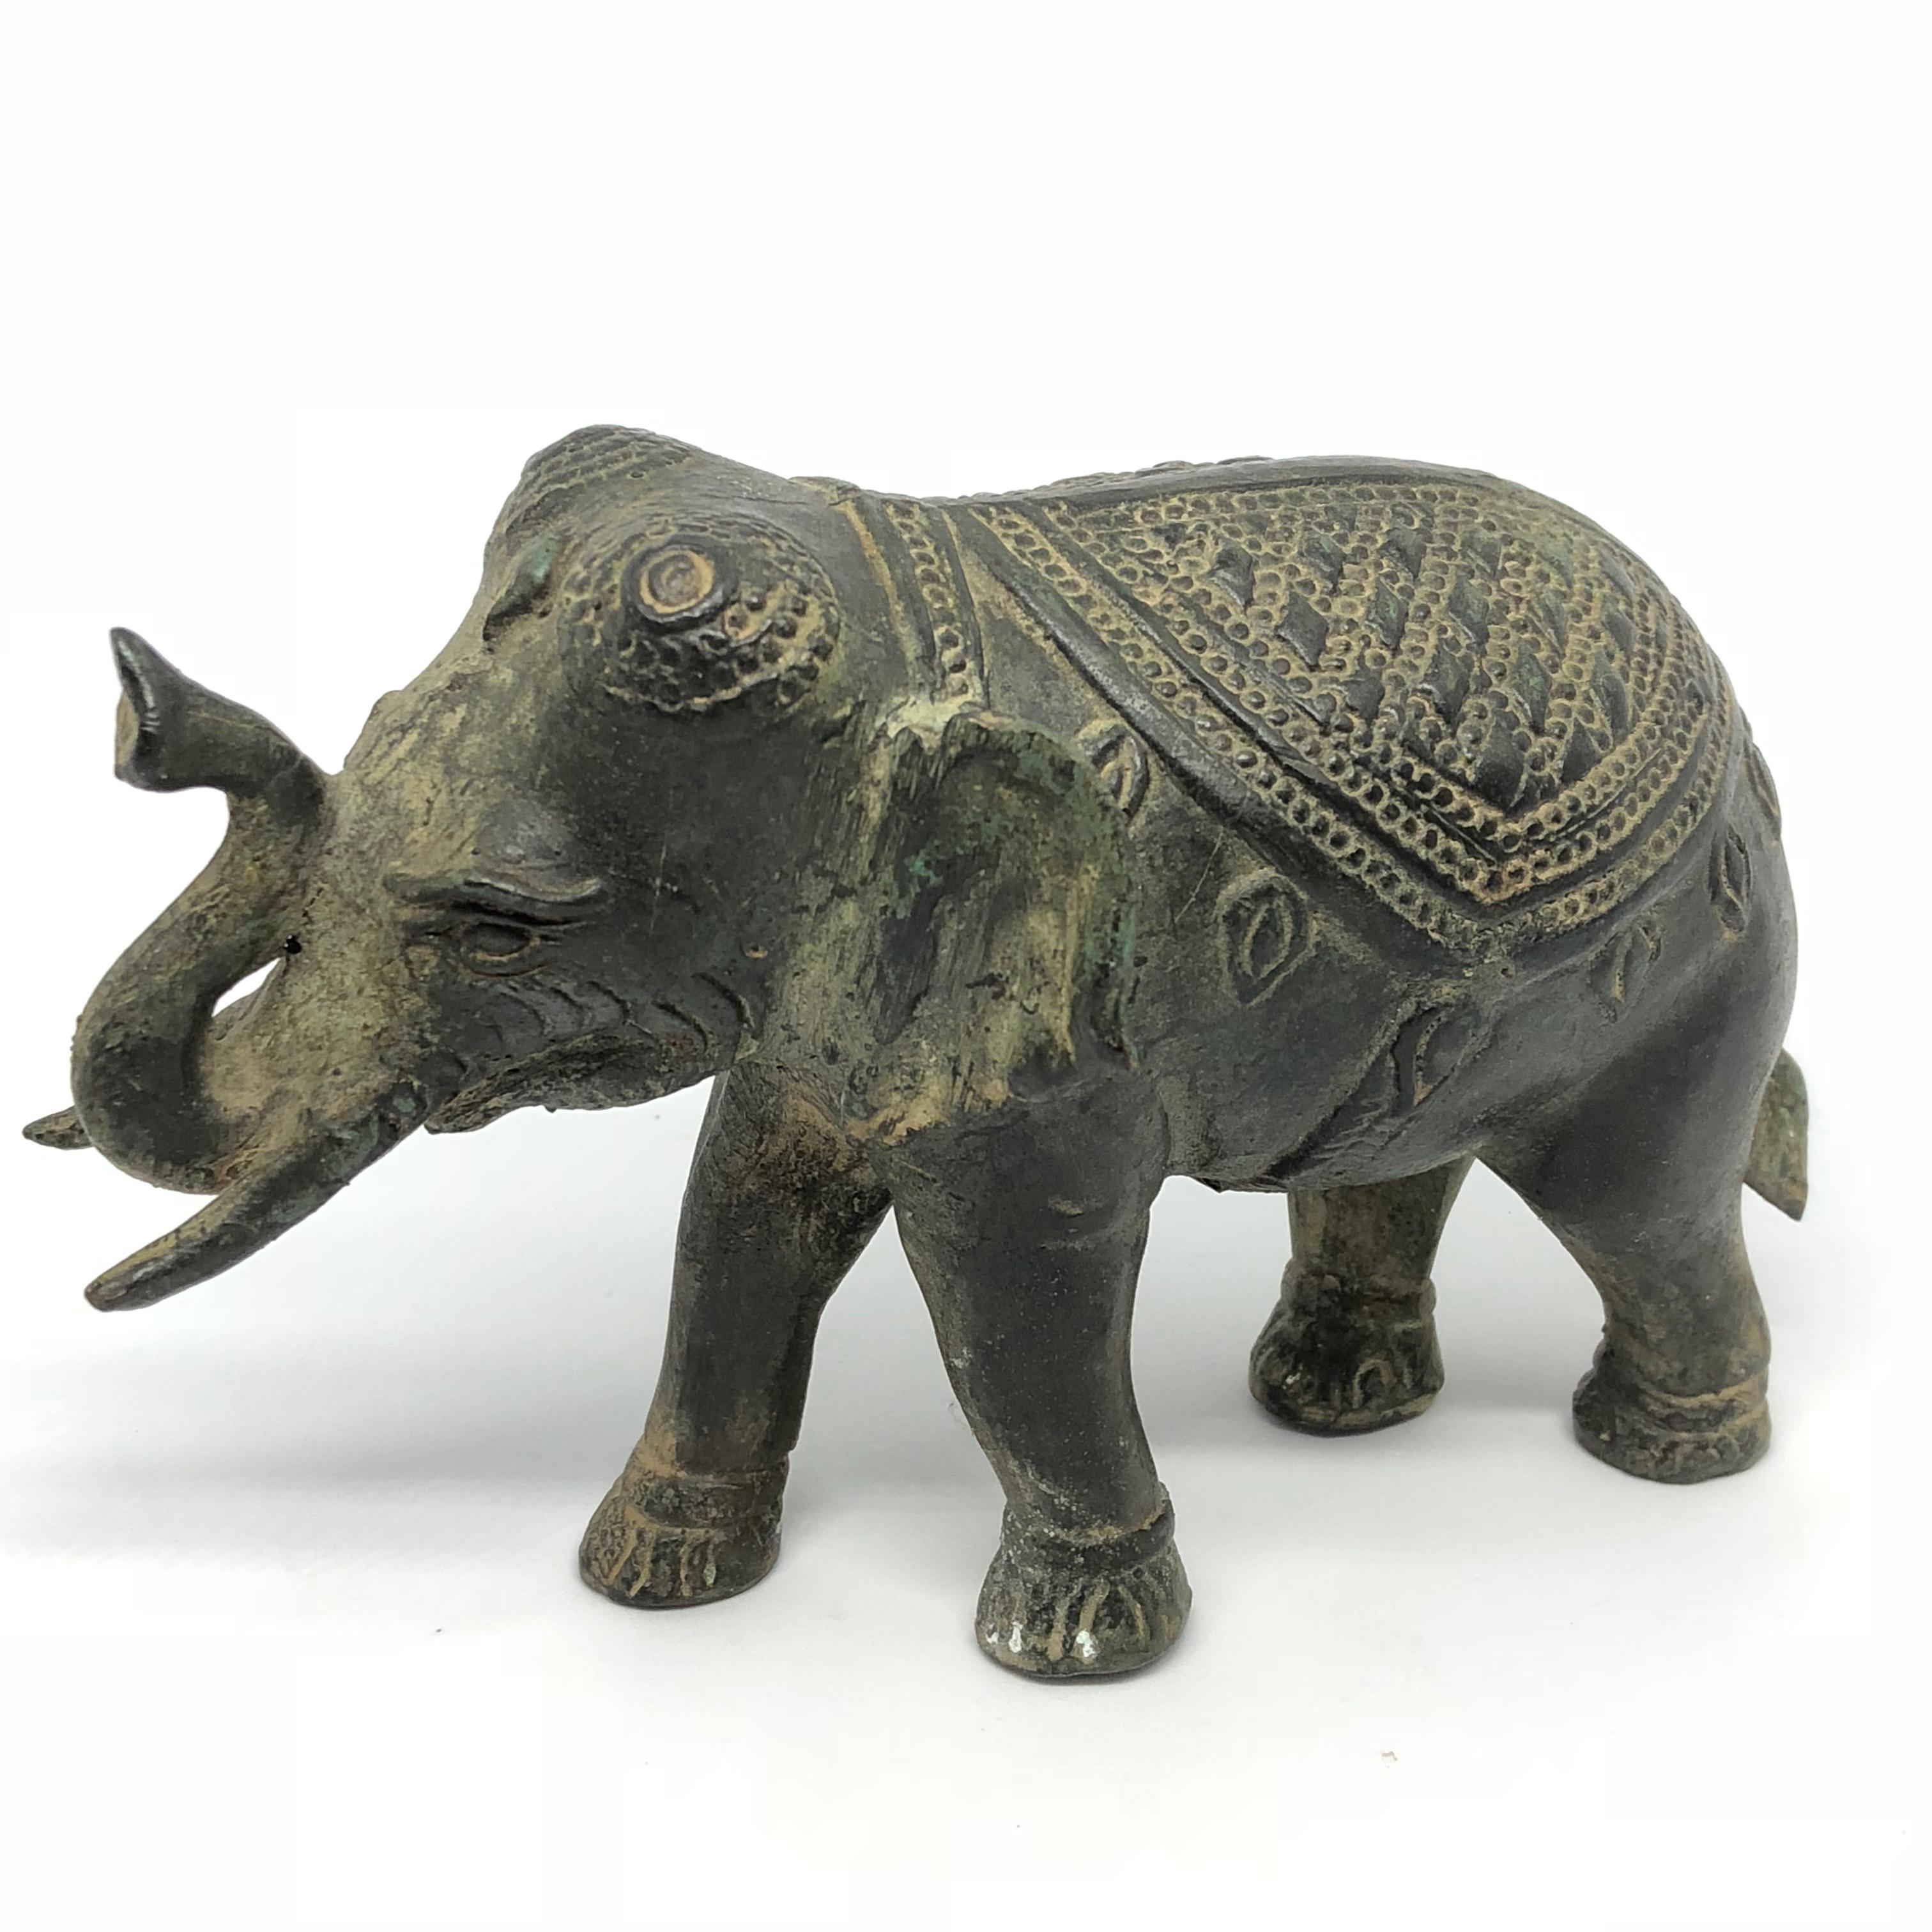 A decorative hand made elephant sculpture or statue. Some wear but this is old-age. Made of brass or bronze. We think it is from Asia and was made in the mid-20th century.